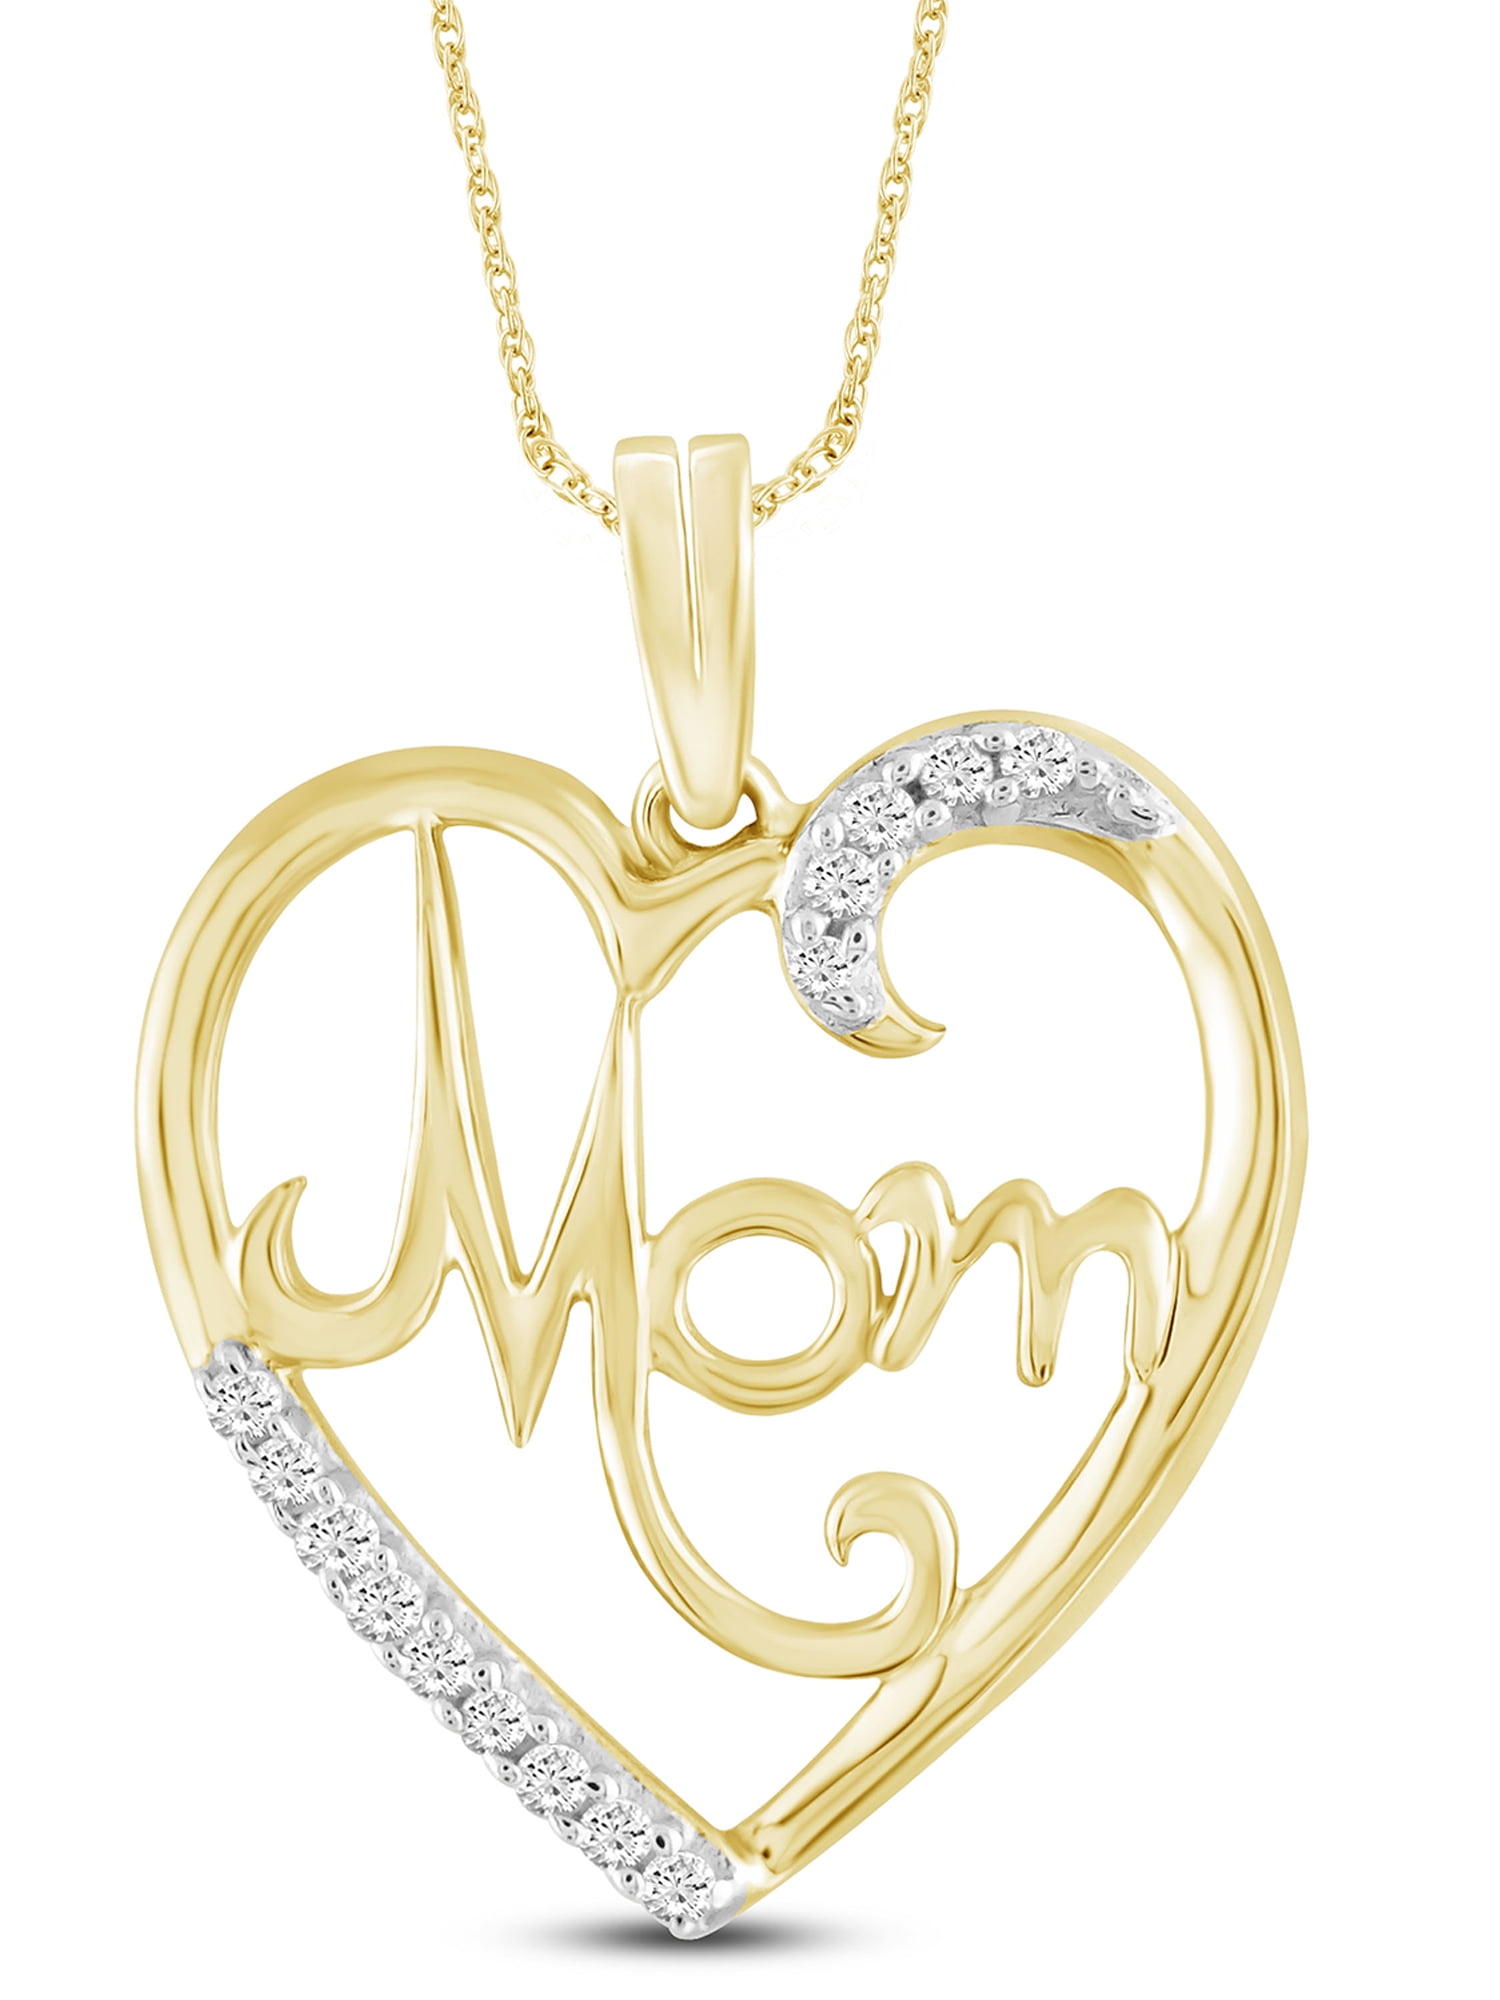 Gold Heart Initial Gold Moon Necklace Set For Women And Teen Girls Trendy  Designer Diamond Jewelry For Couples, Weddings, Parties, And Gifts From  Premiumjewelrystore, $19.54